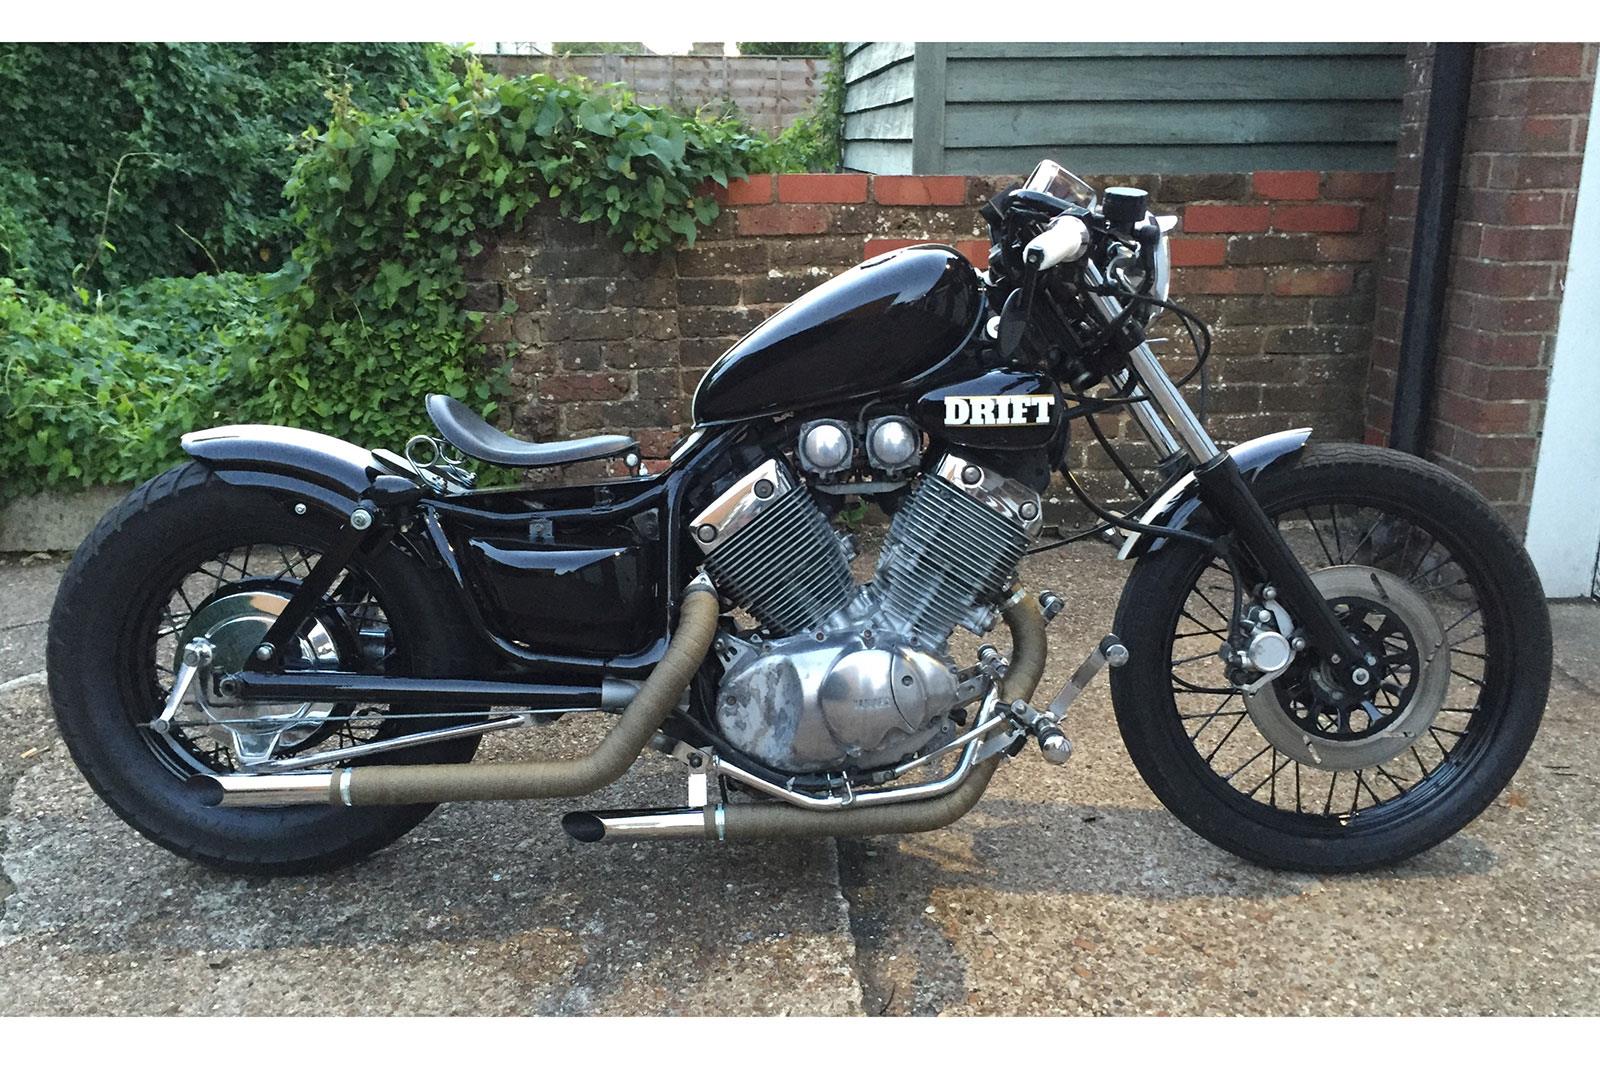 Shed Built His Only Request Was That He Wanted A Hard Tail Conversion Mcn